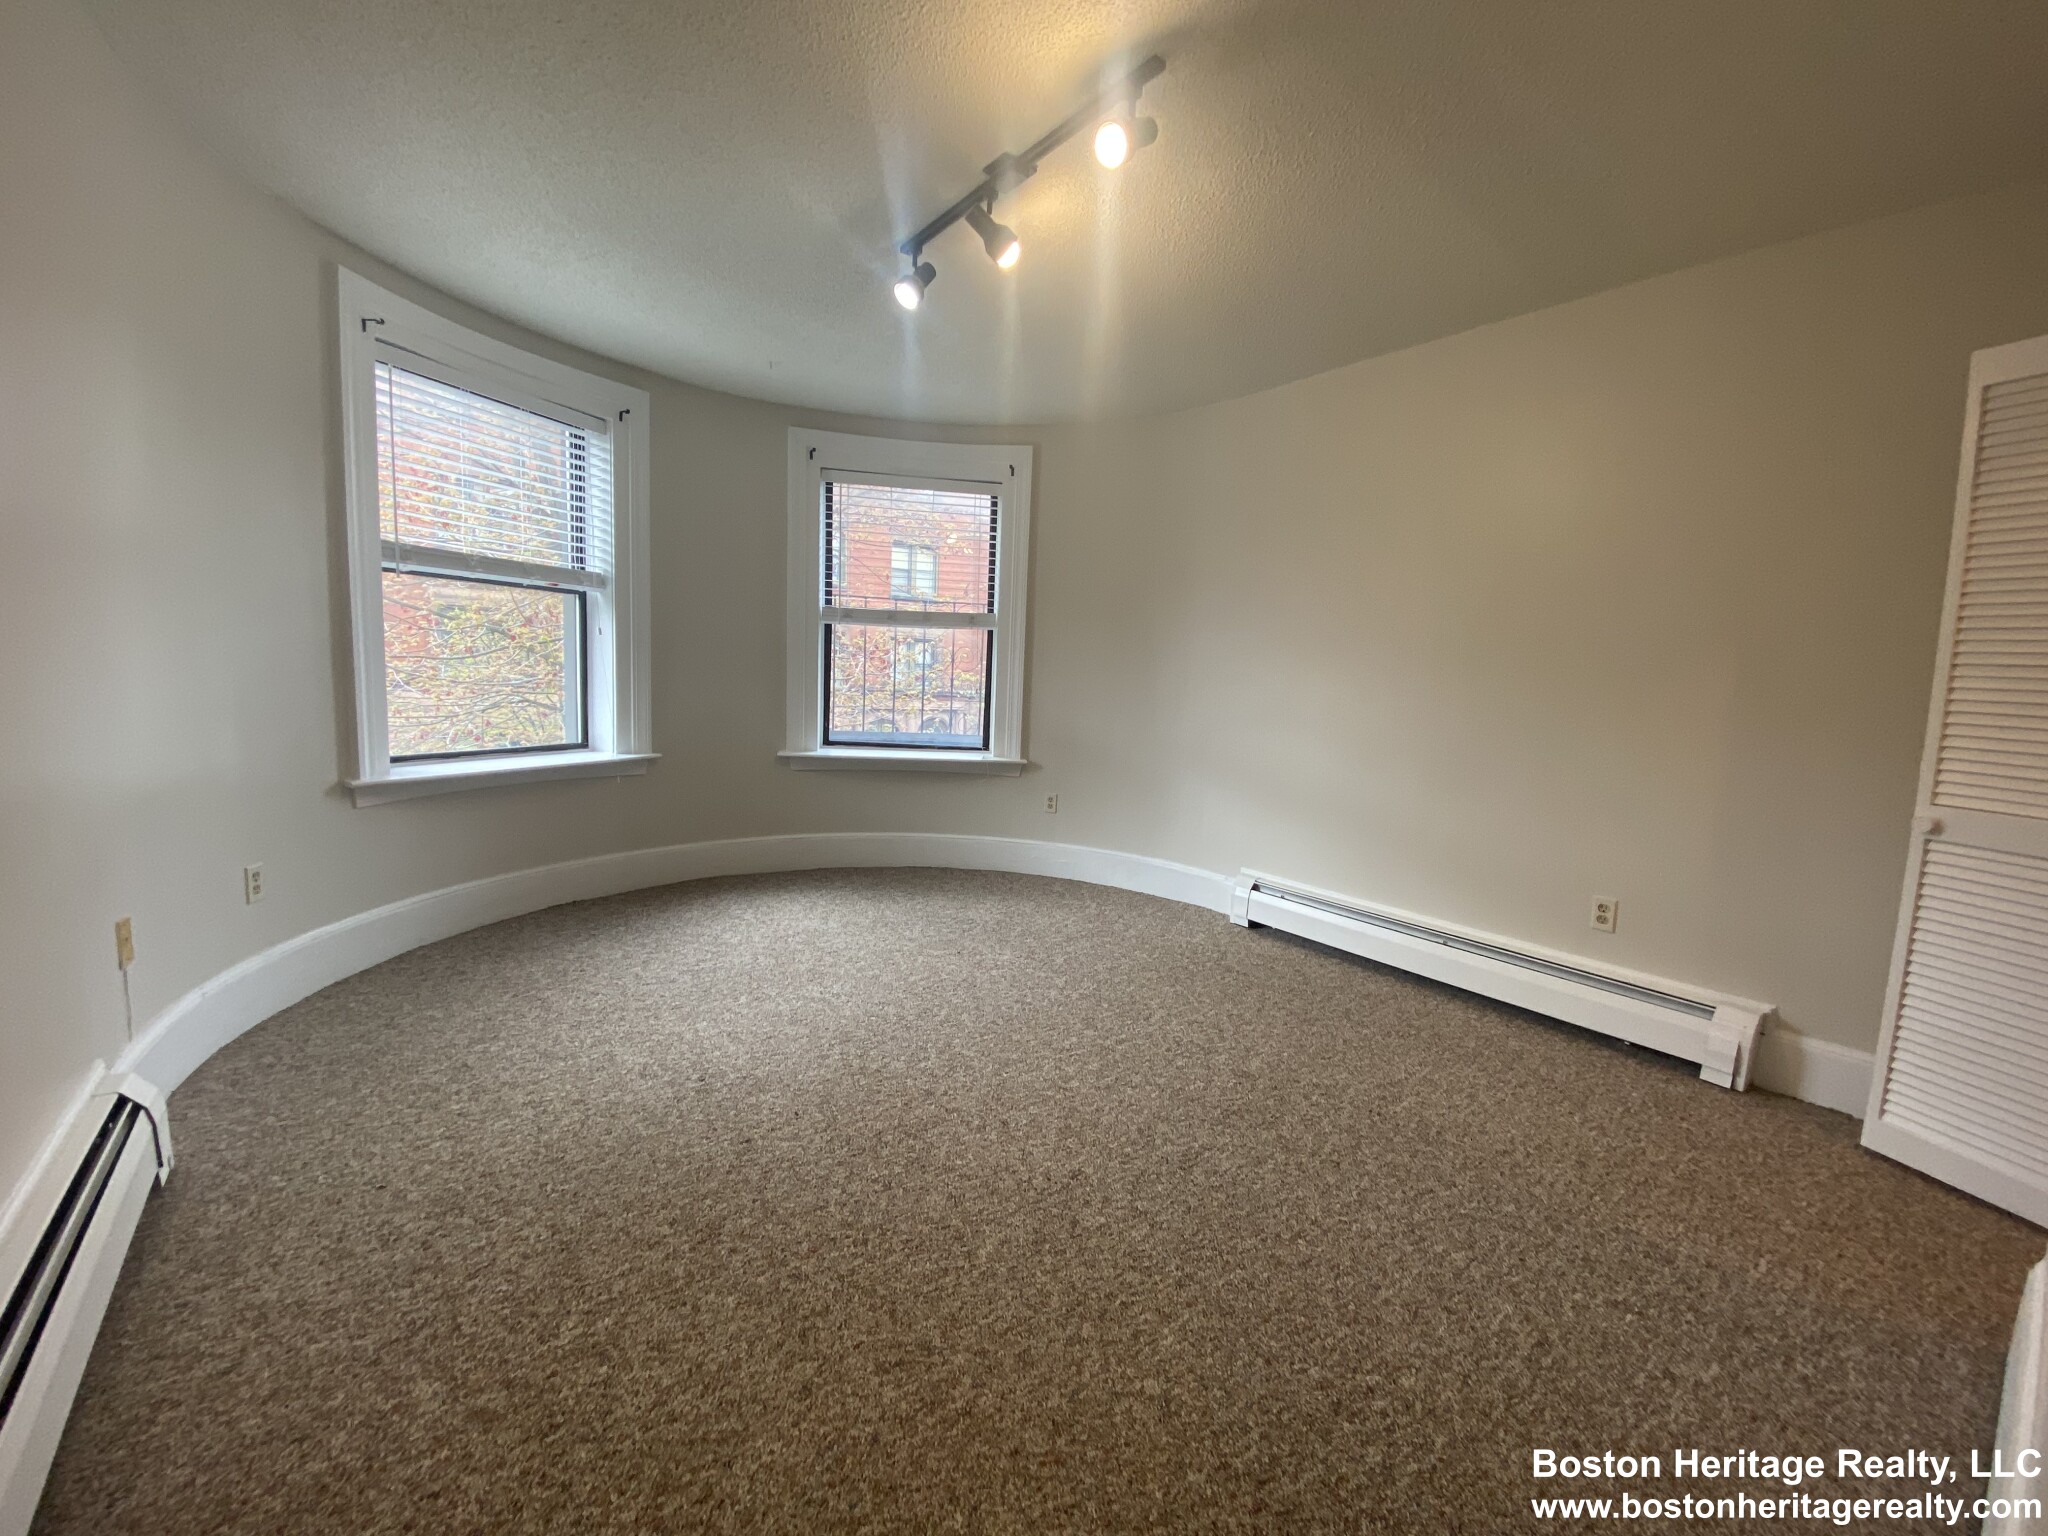 1 Bed, 1 Bath apartment in Boston, Fenway for $2,700